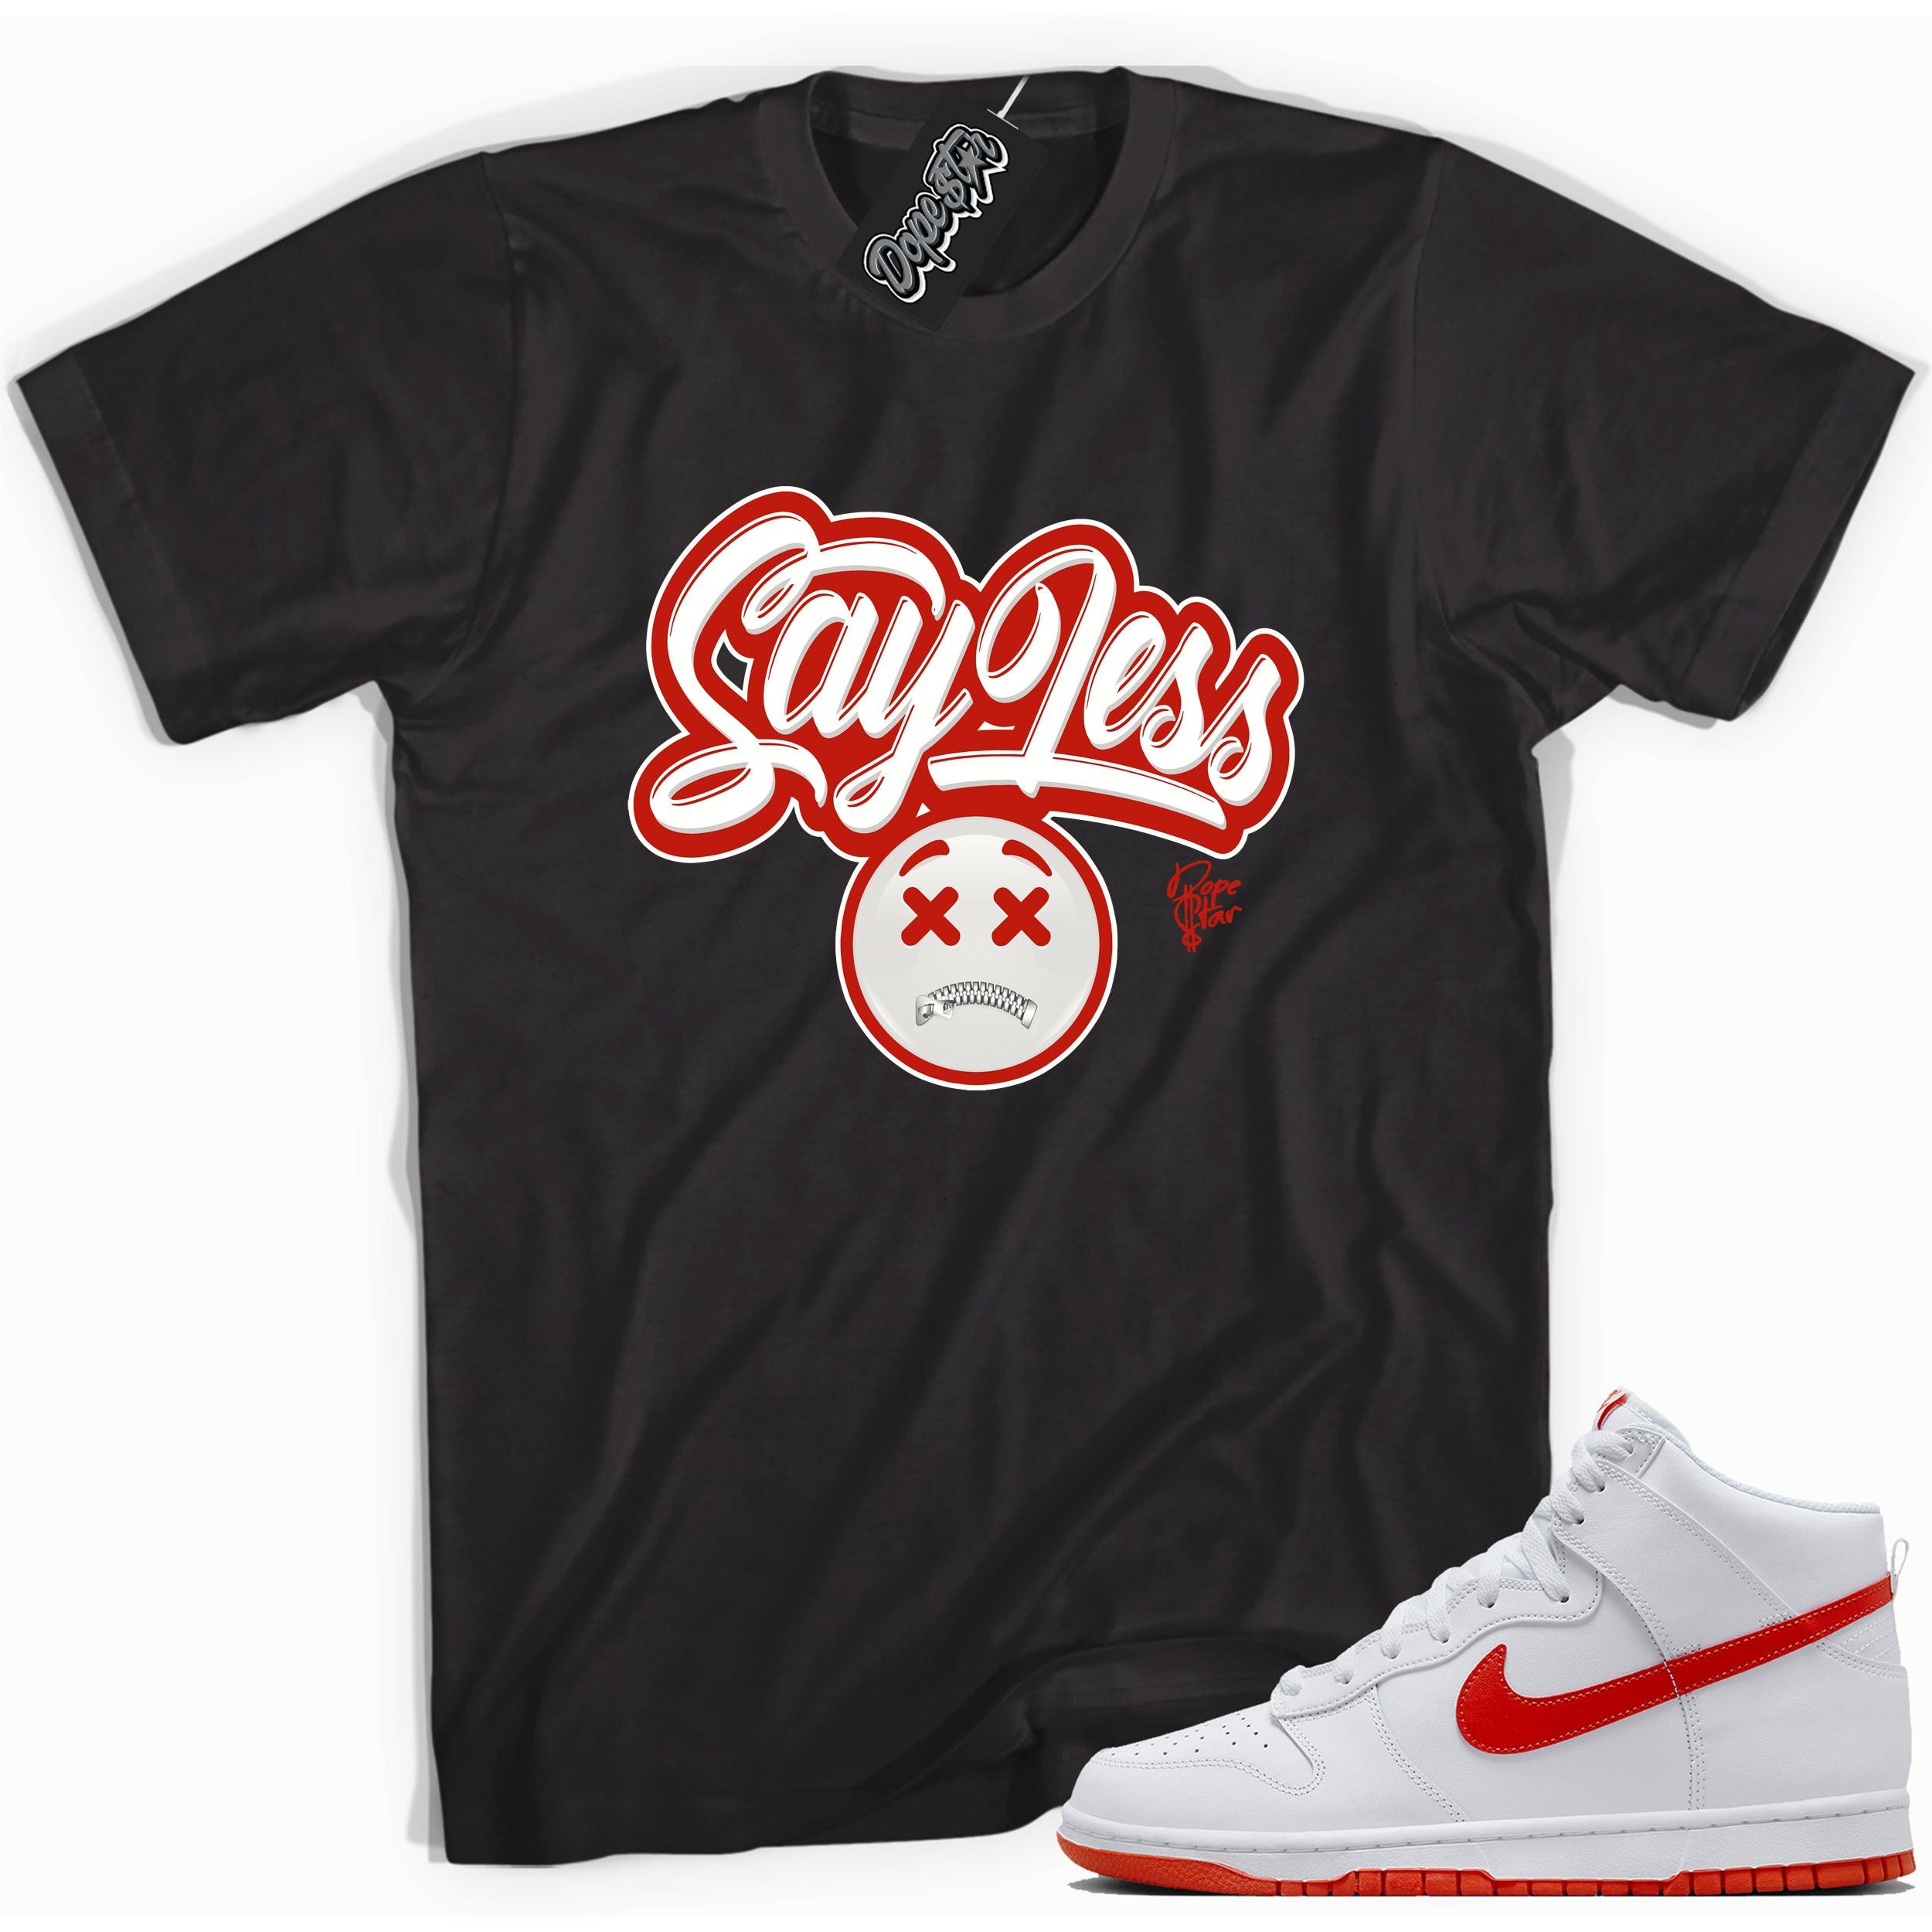 Cool black graphic tee with 'say less' print, that perfectly matches Nike Dunk High White Picante Red sneakers.